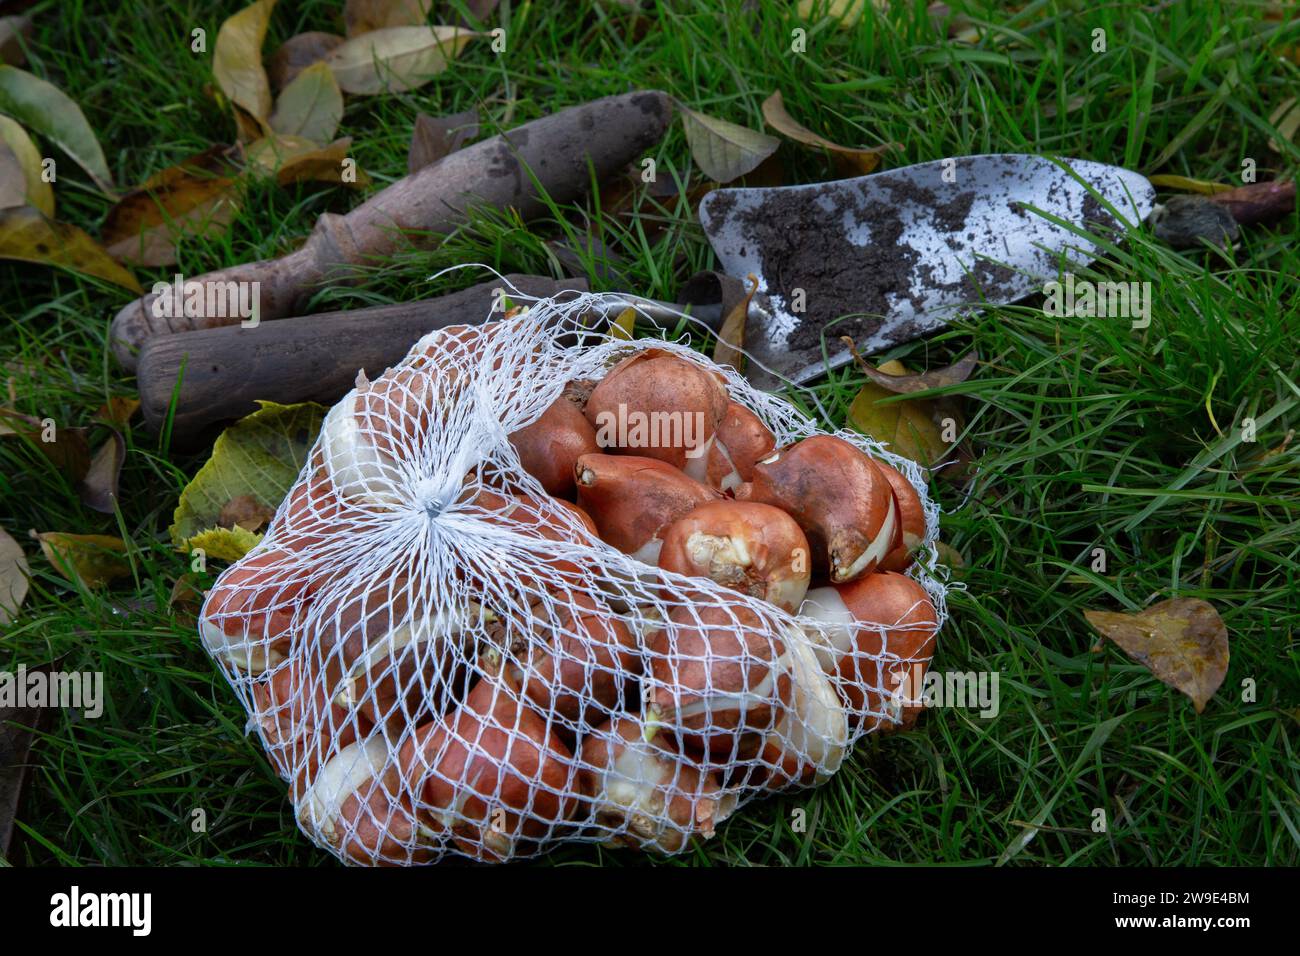 Tulip bulbs in a net bag ready for planting. Stock Photo